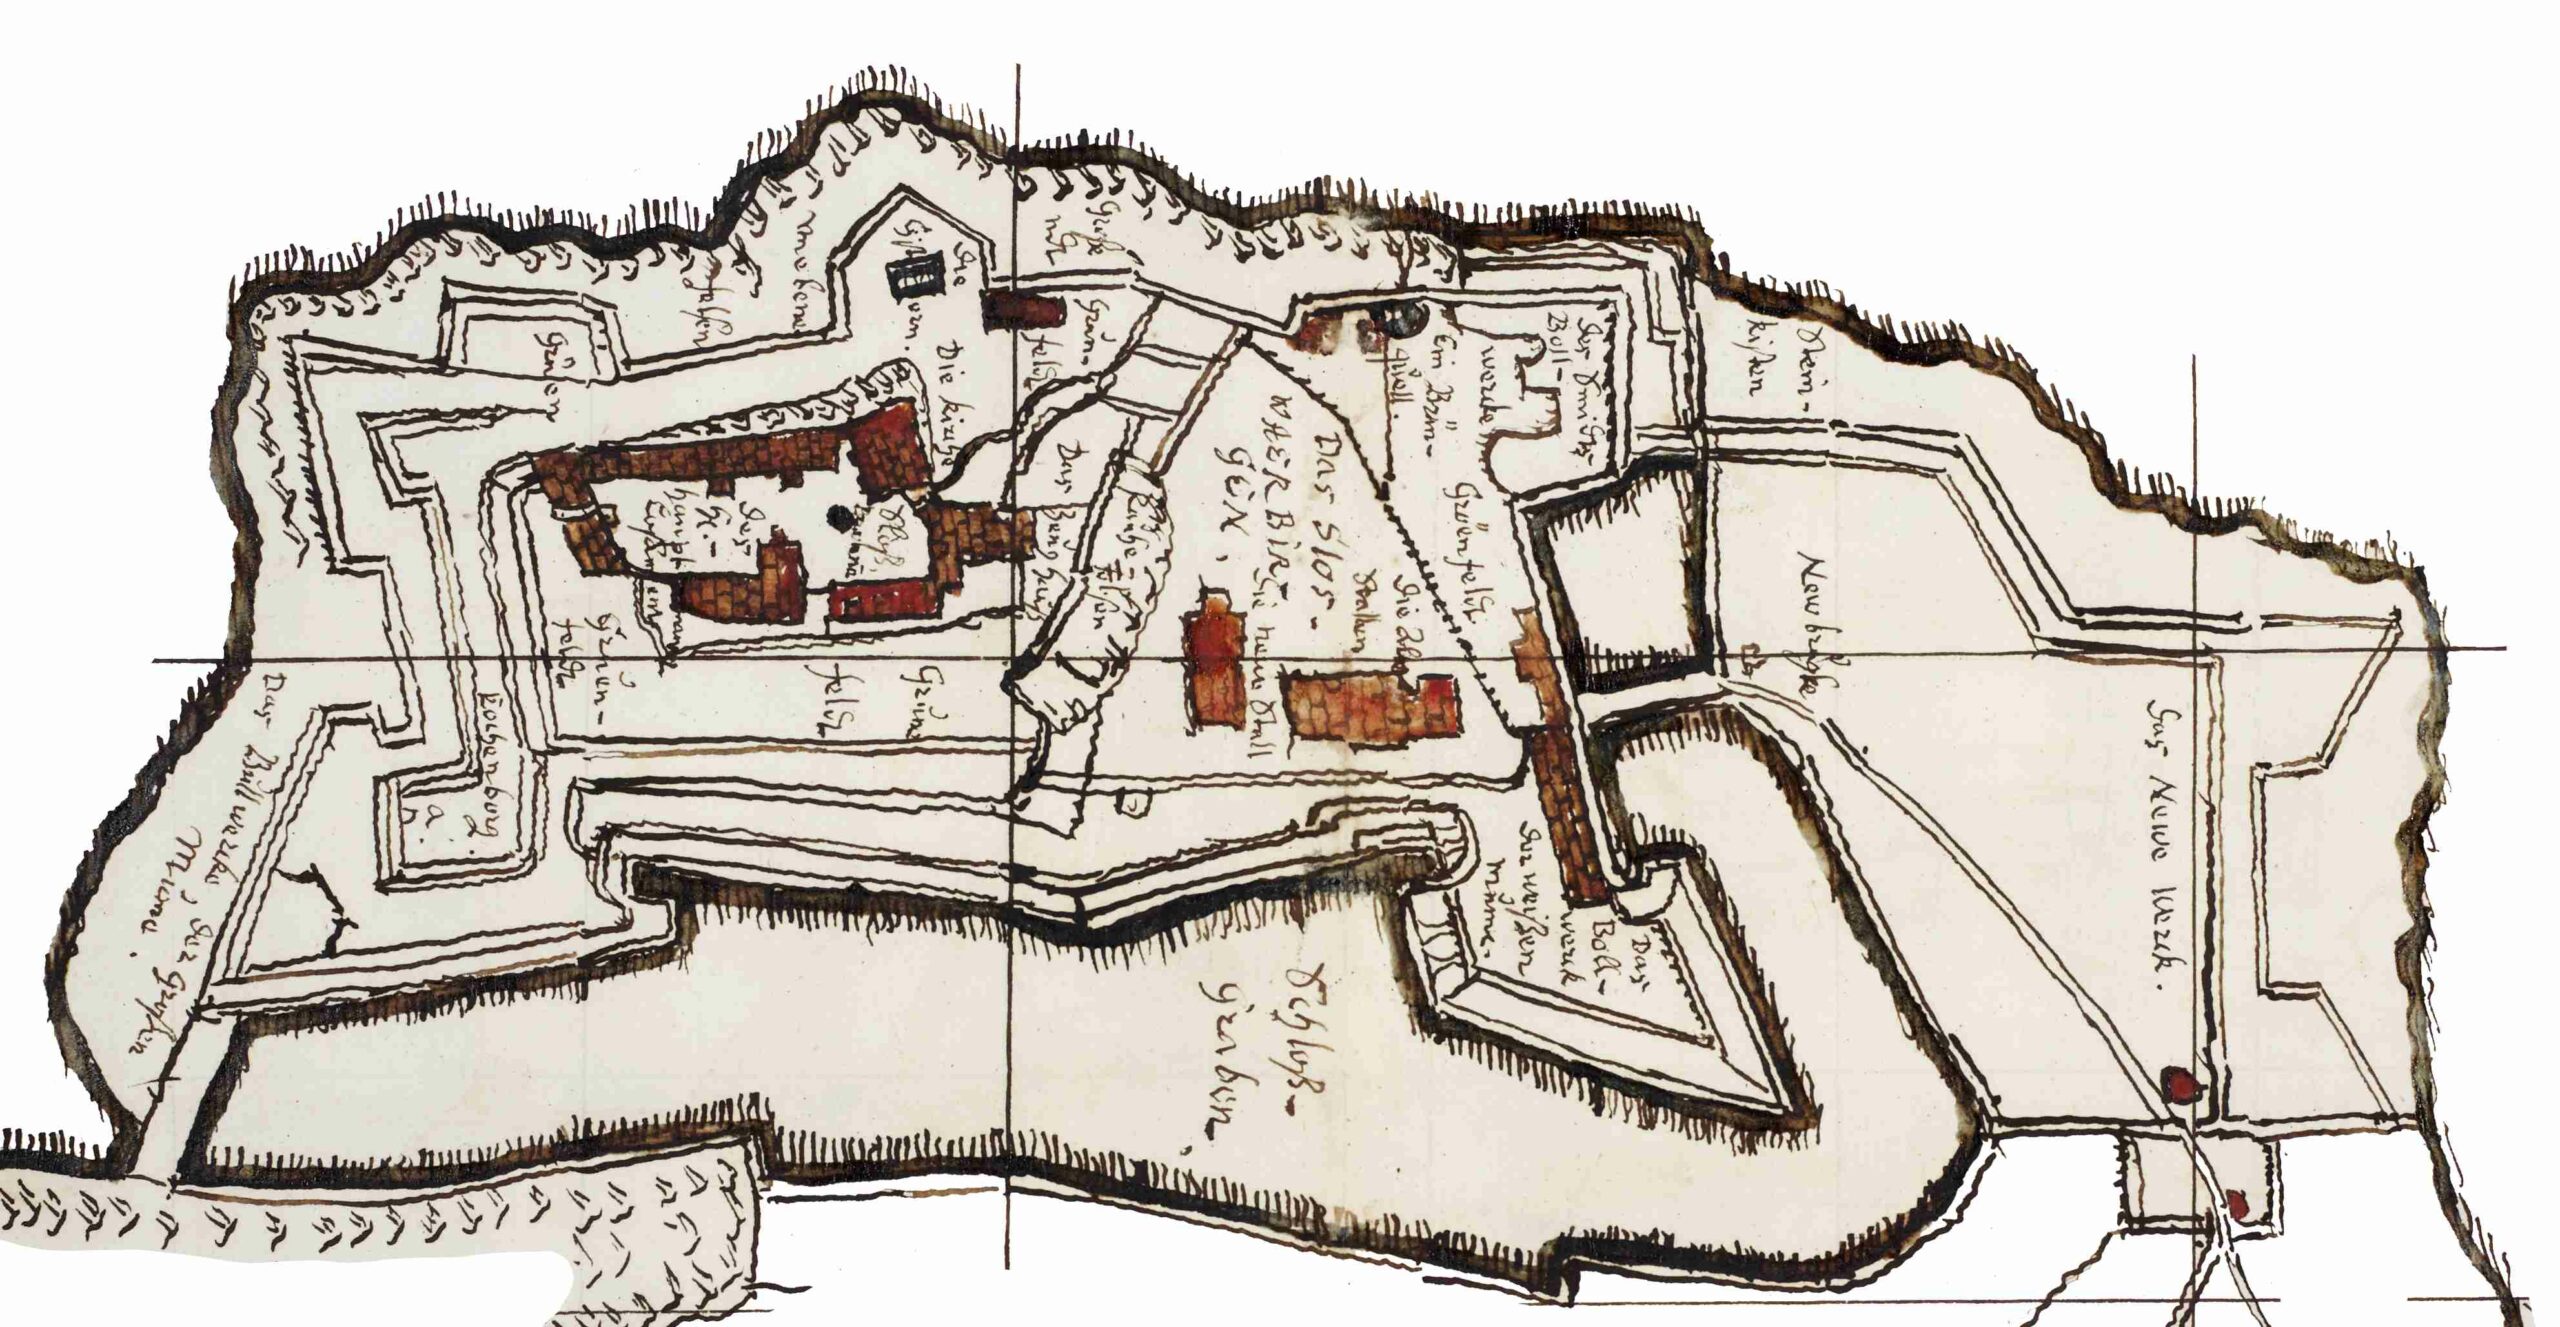 JoJohannes Mejer’s map of Varberg Fortress in 1638. The original is kept at the Royal Library, Copenhagen. hannes Mejer’s map of Varberg Fortress in 1638. The original is kept at the Royal Library, Copenhagen.